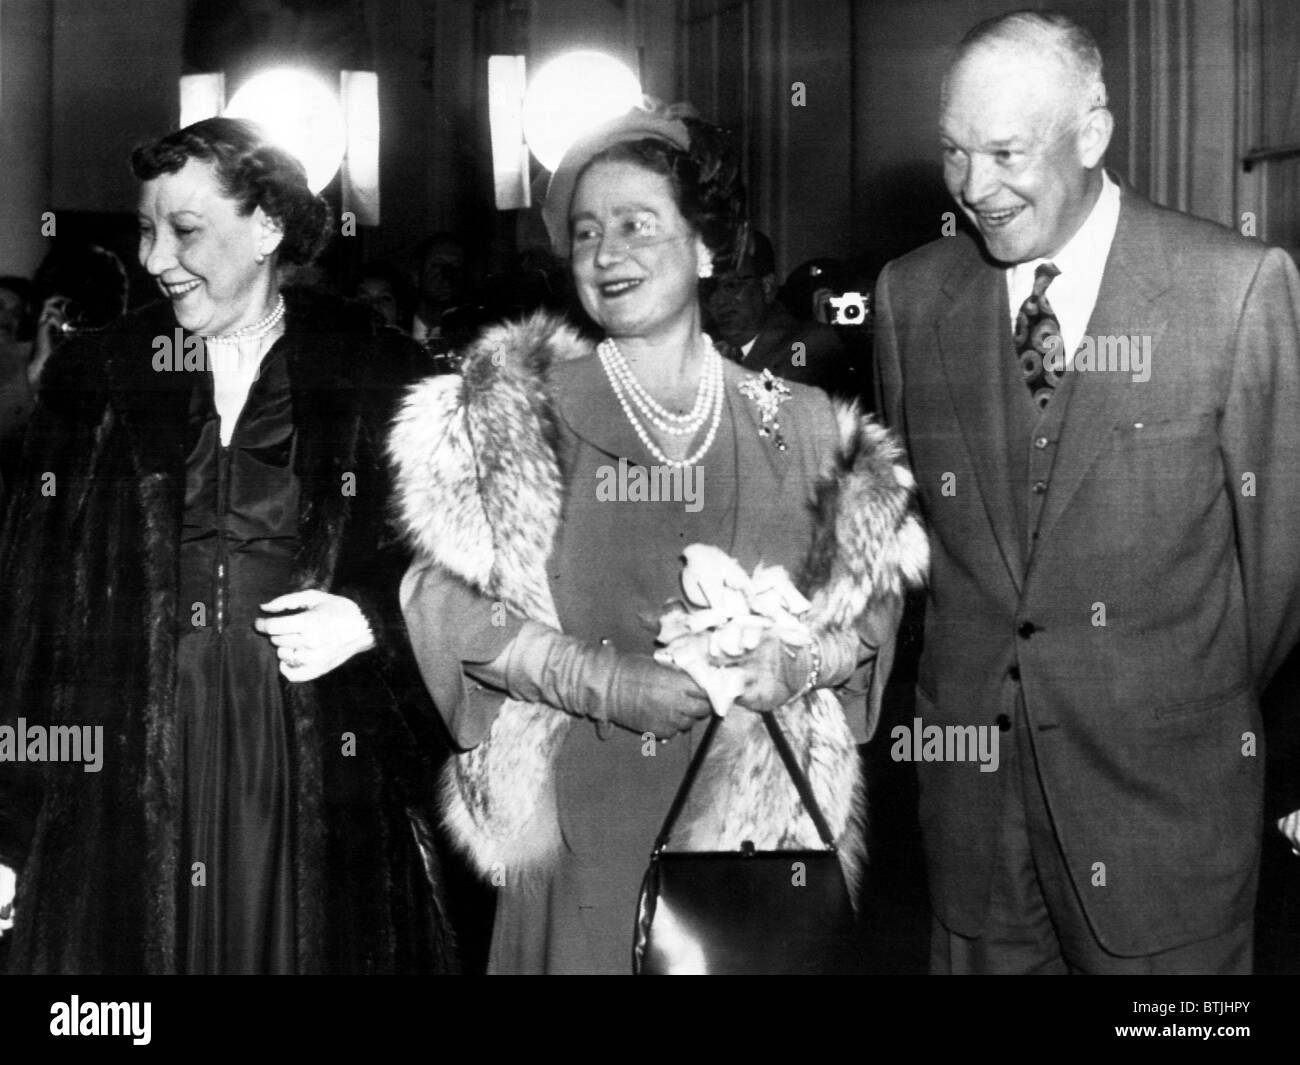 Mamie Eisenhower, Queen Mother Elizabeth, and President Dwight D. Eisenhower on the steps of the White House after a royal visit Stock Photo